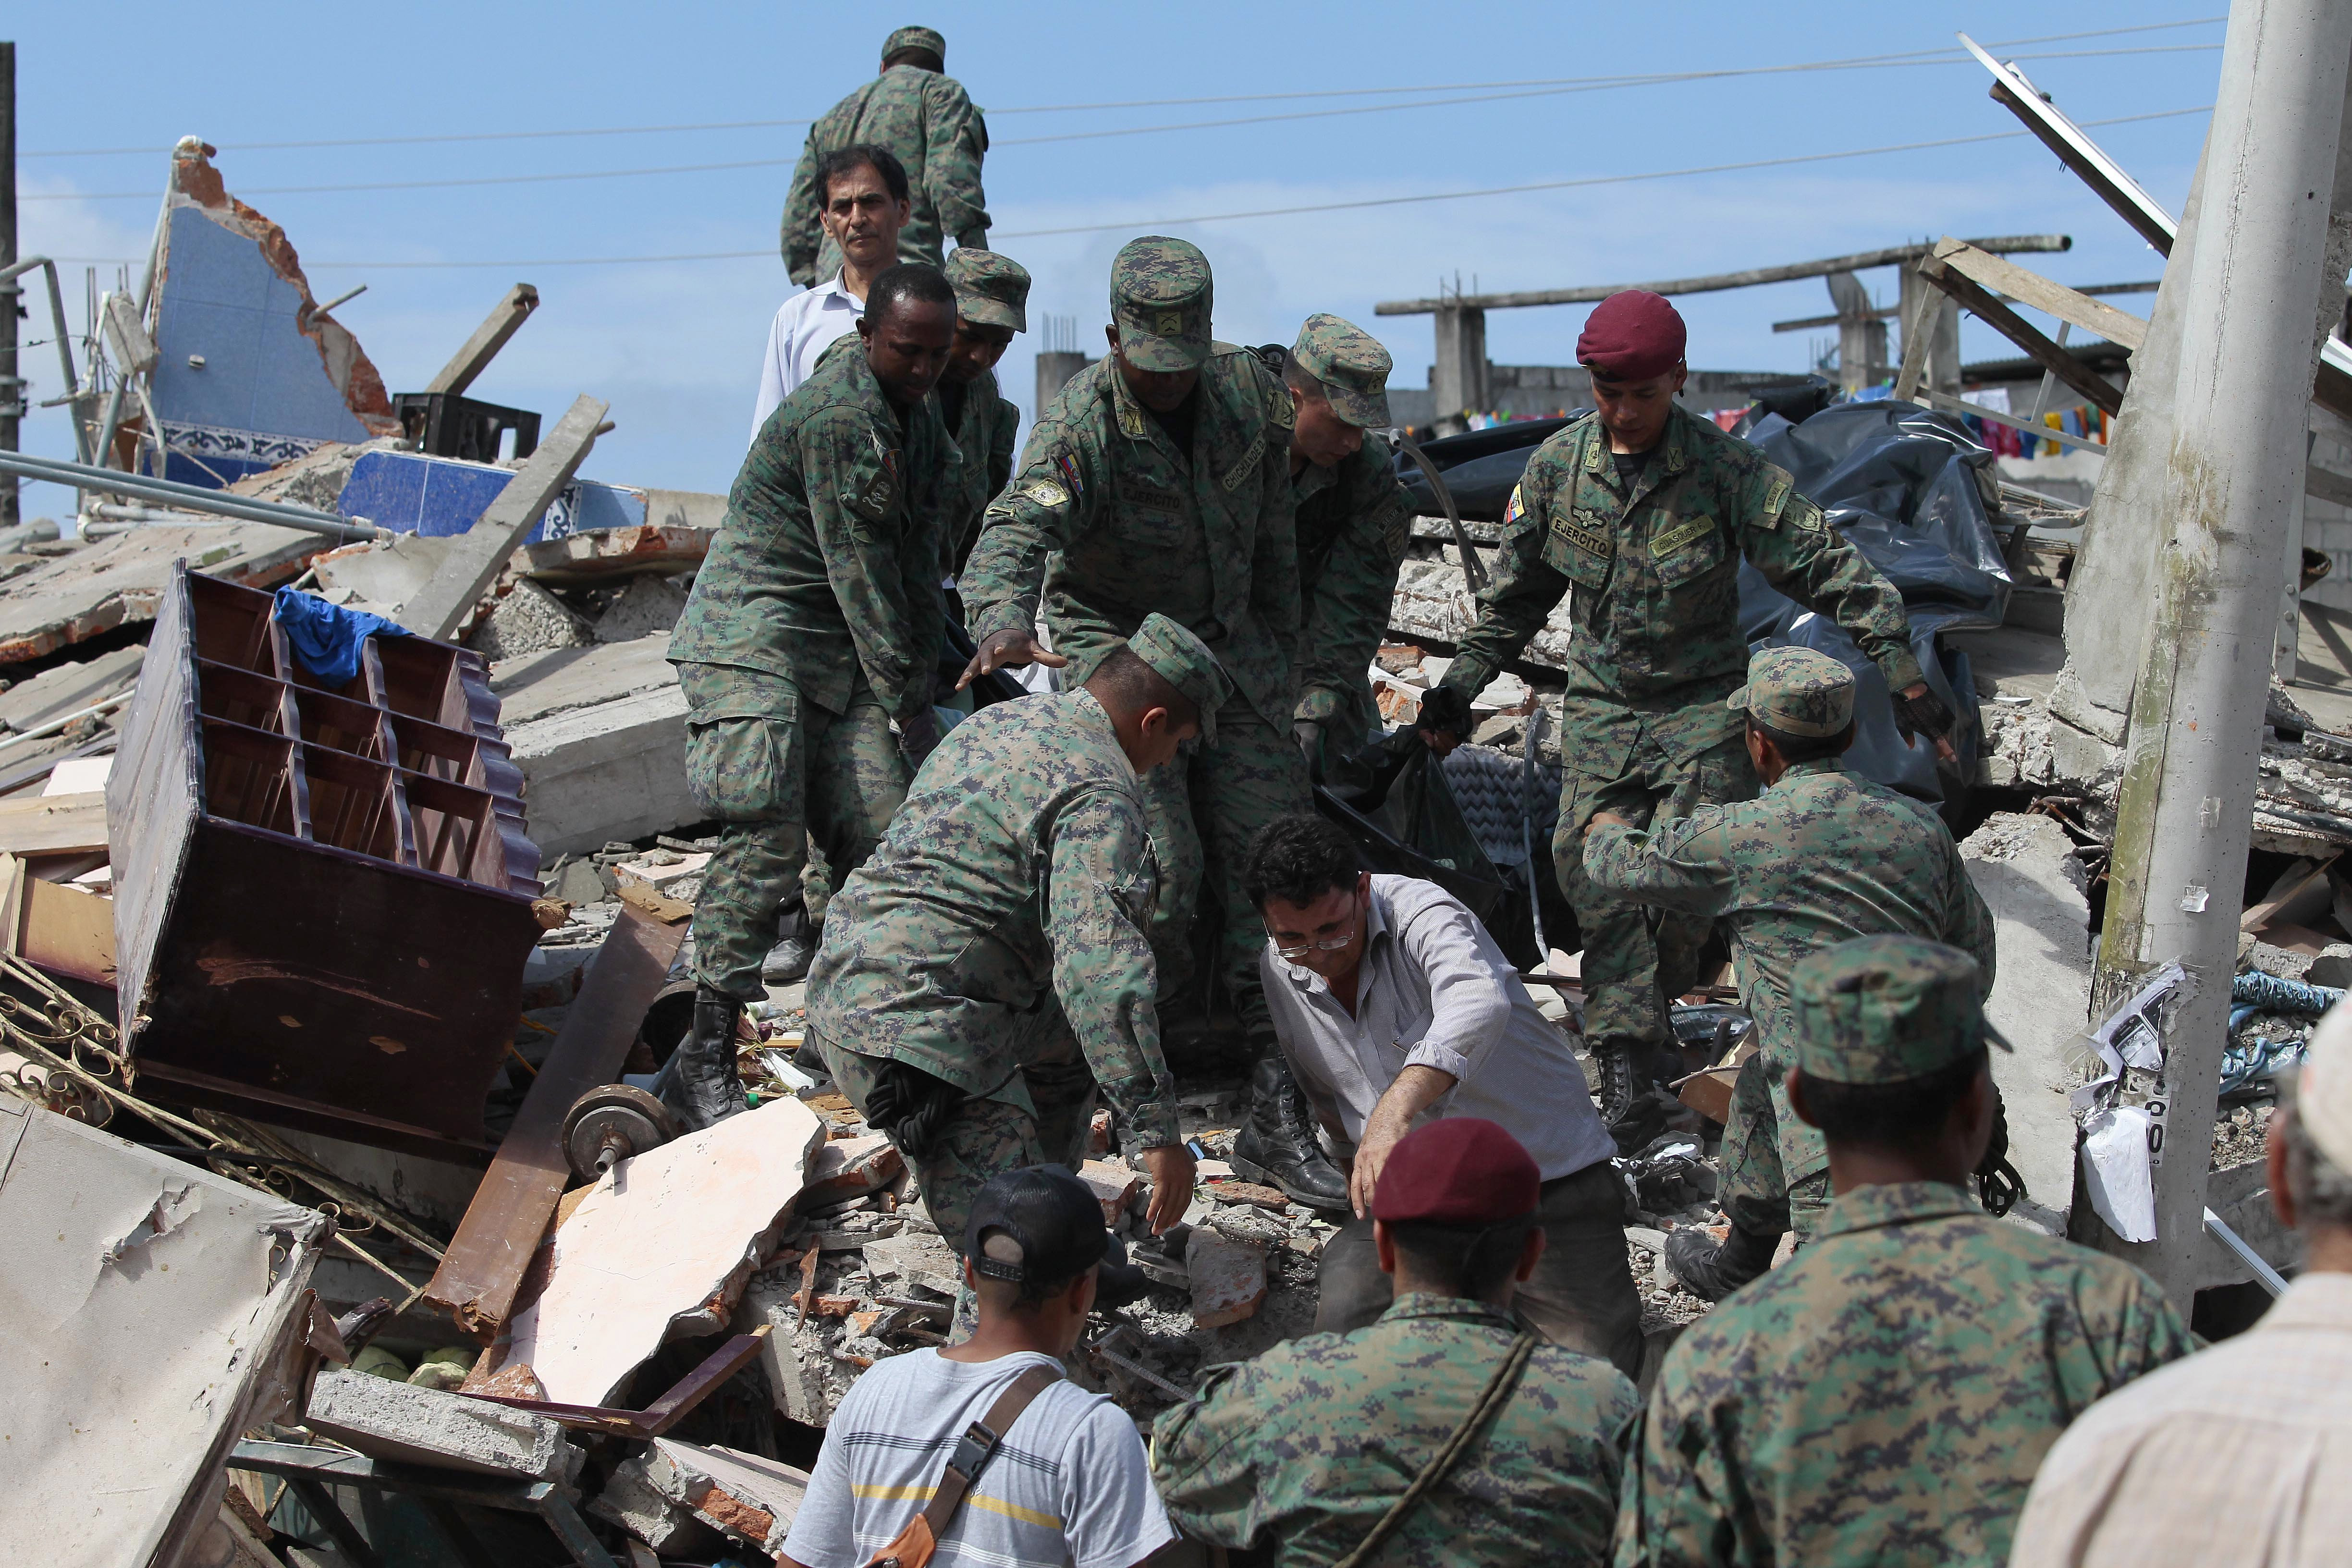 FRANTIC SEARCH. Residents and army forces look for survivors after a powerful earthquake, in the town of Pedernales, Ecuador, April 17, 2016. Photo by Jose Jacome/EPA 